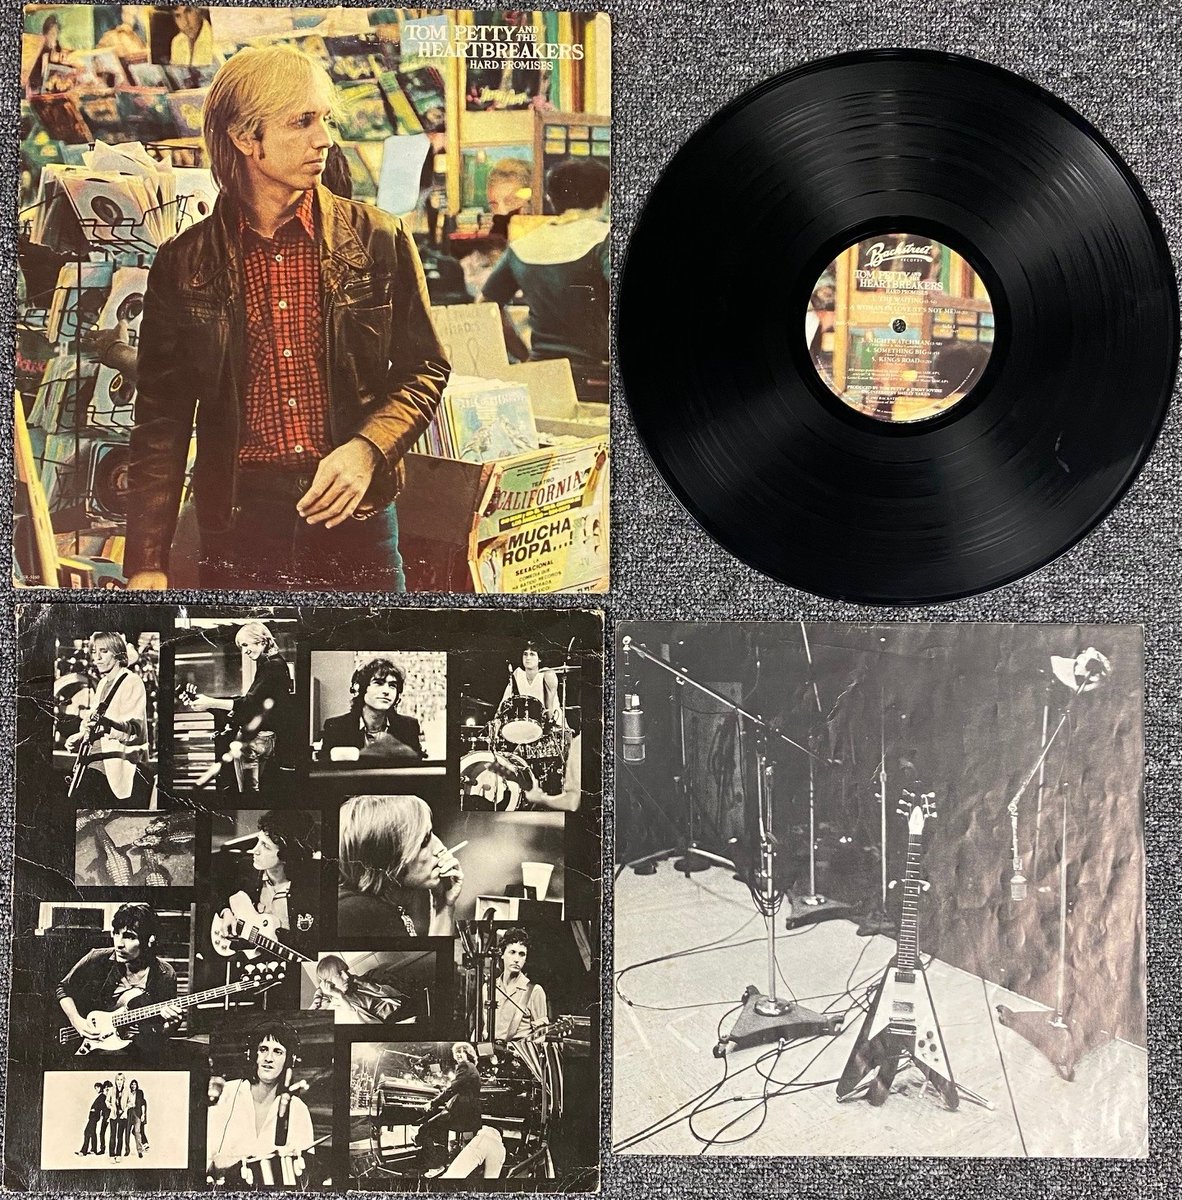 Today in 1981 @TomPetty and the Heartbreakers release their album #HardPromises What are your top 5 #TomPetty songs? - @JoeRockOK #Rock #ClassicRock #TomPettyAndTheHeartbreakers #Vinyl #RockOnRock #TodayInRock #1033TheEagle